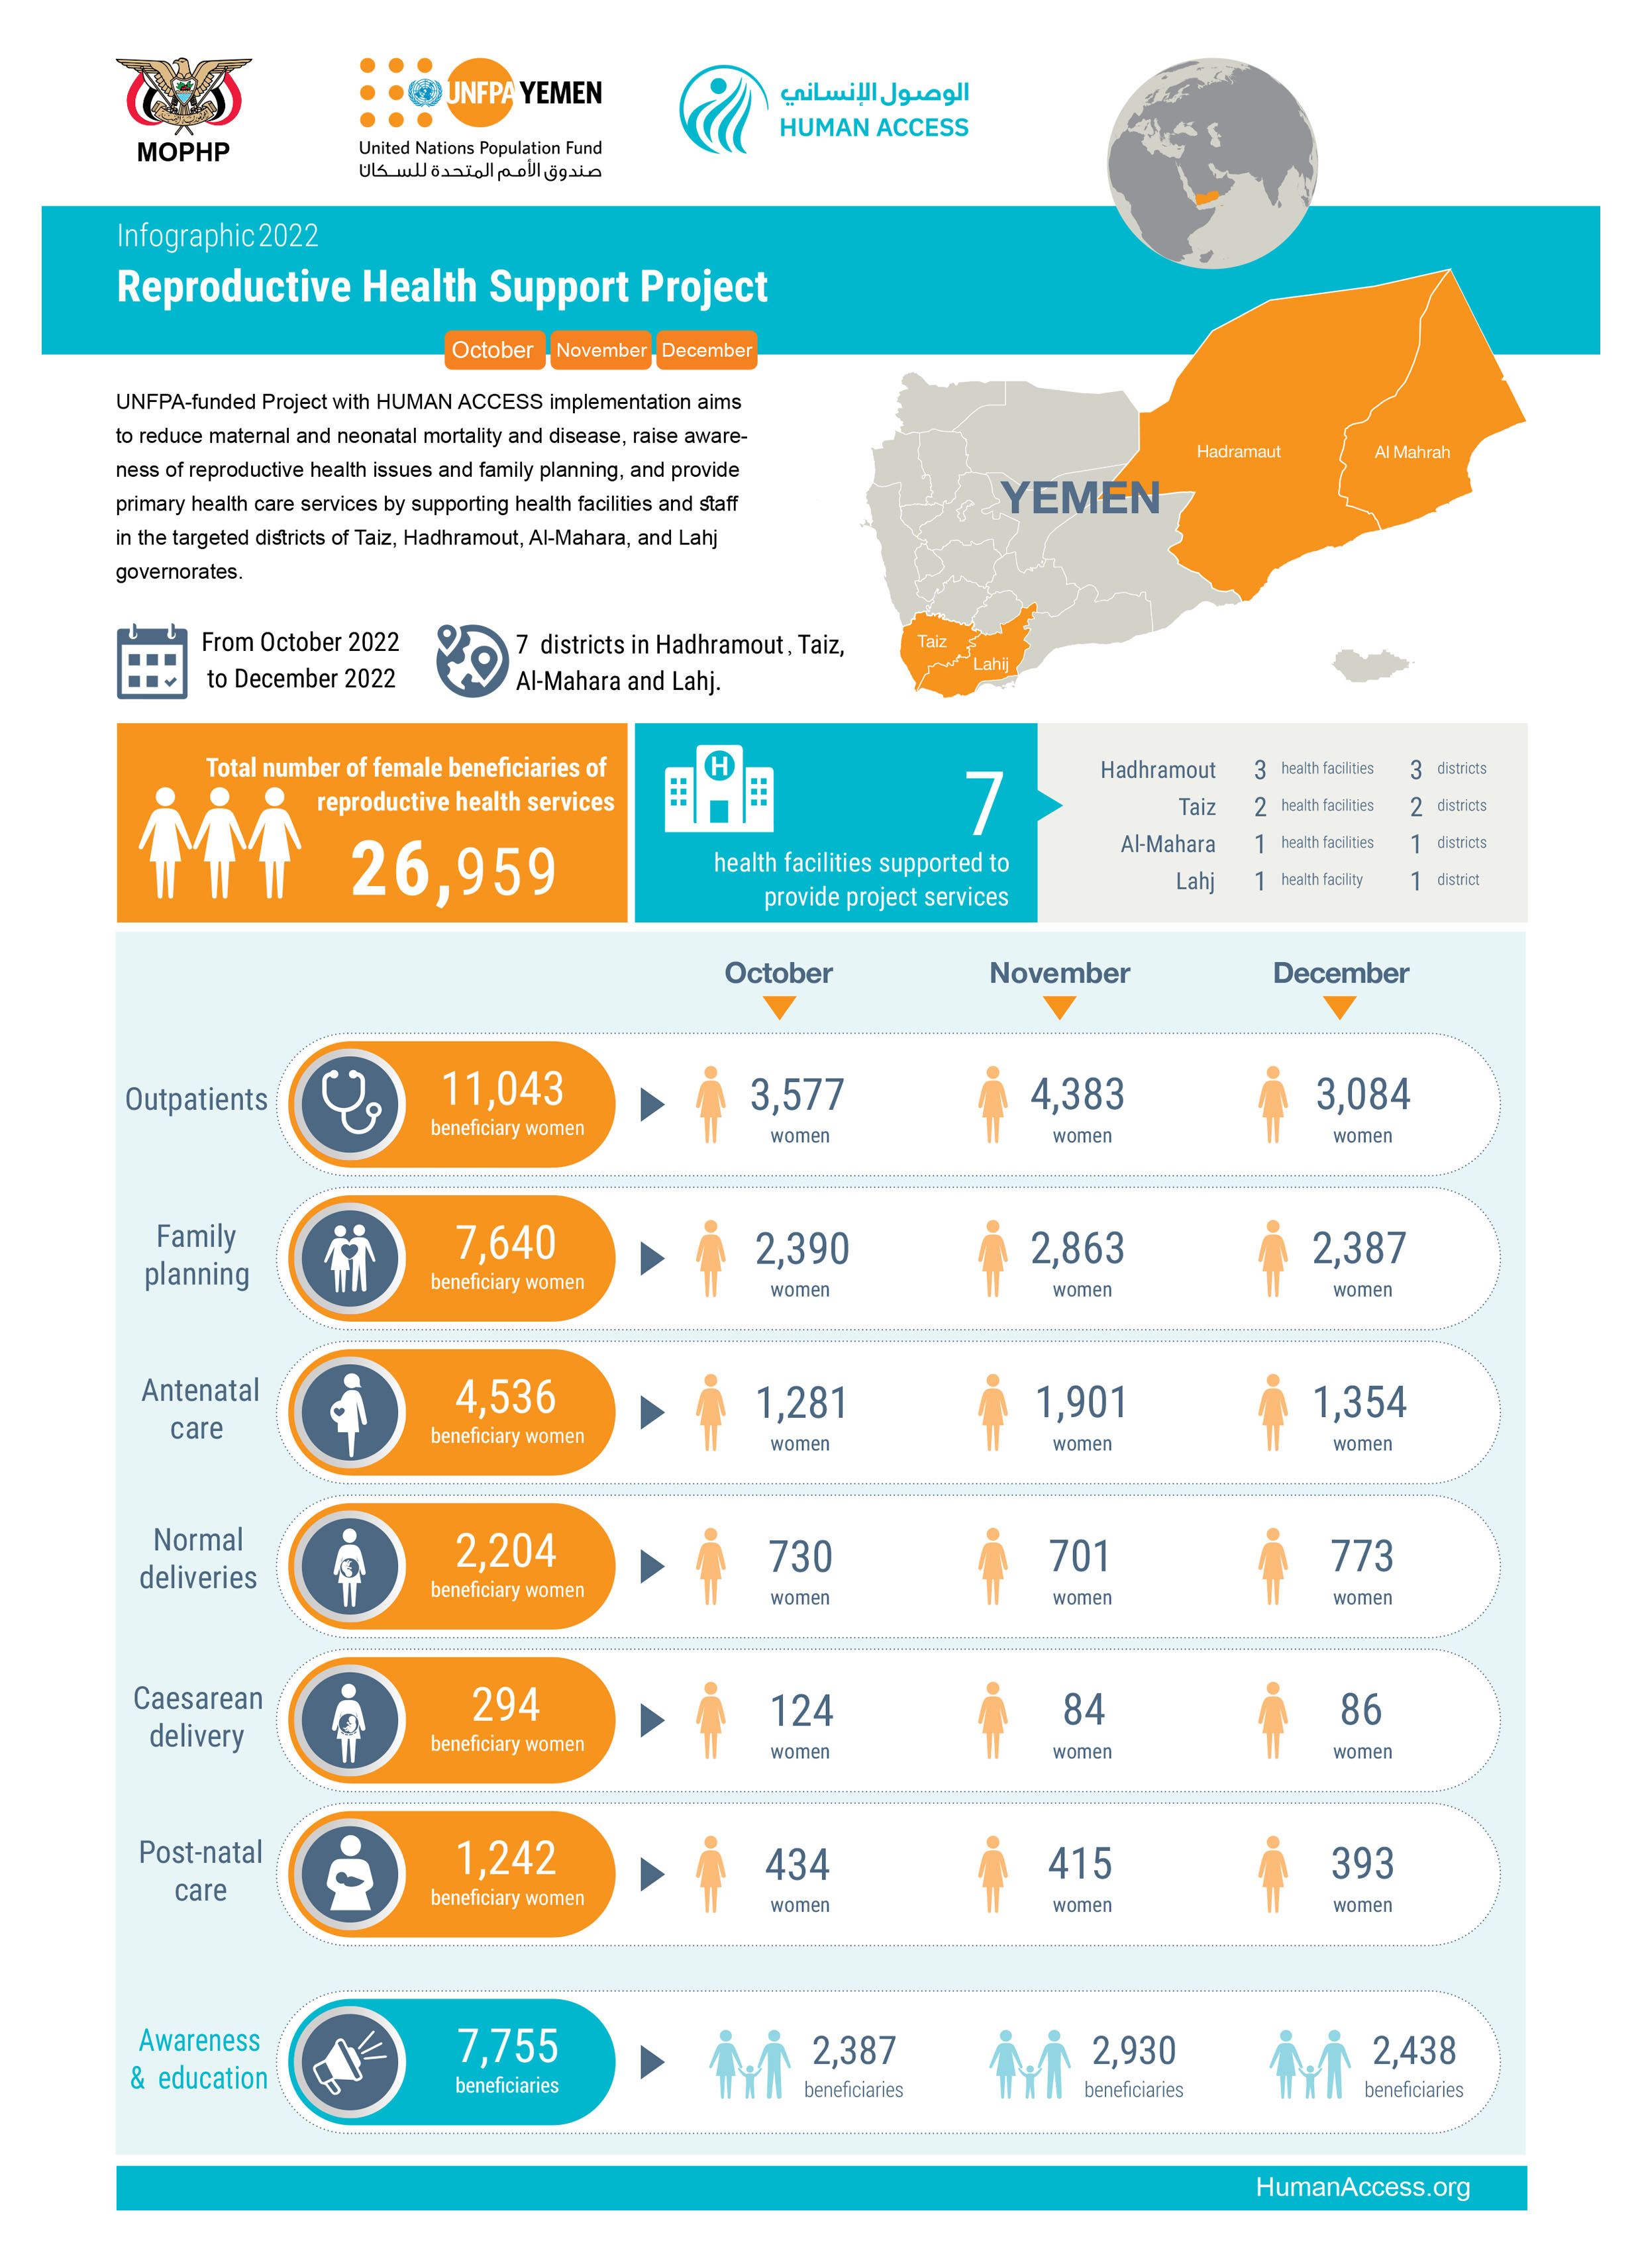 Infographic: Reproductive Health Support Project (Oct, Nov, Dec 2022)